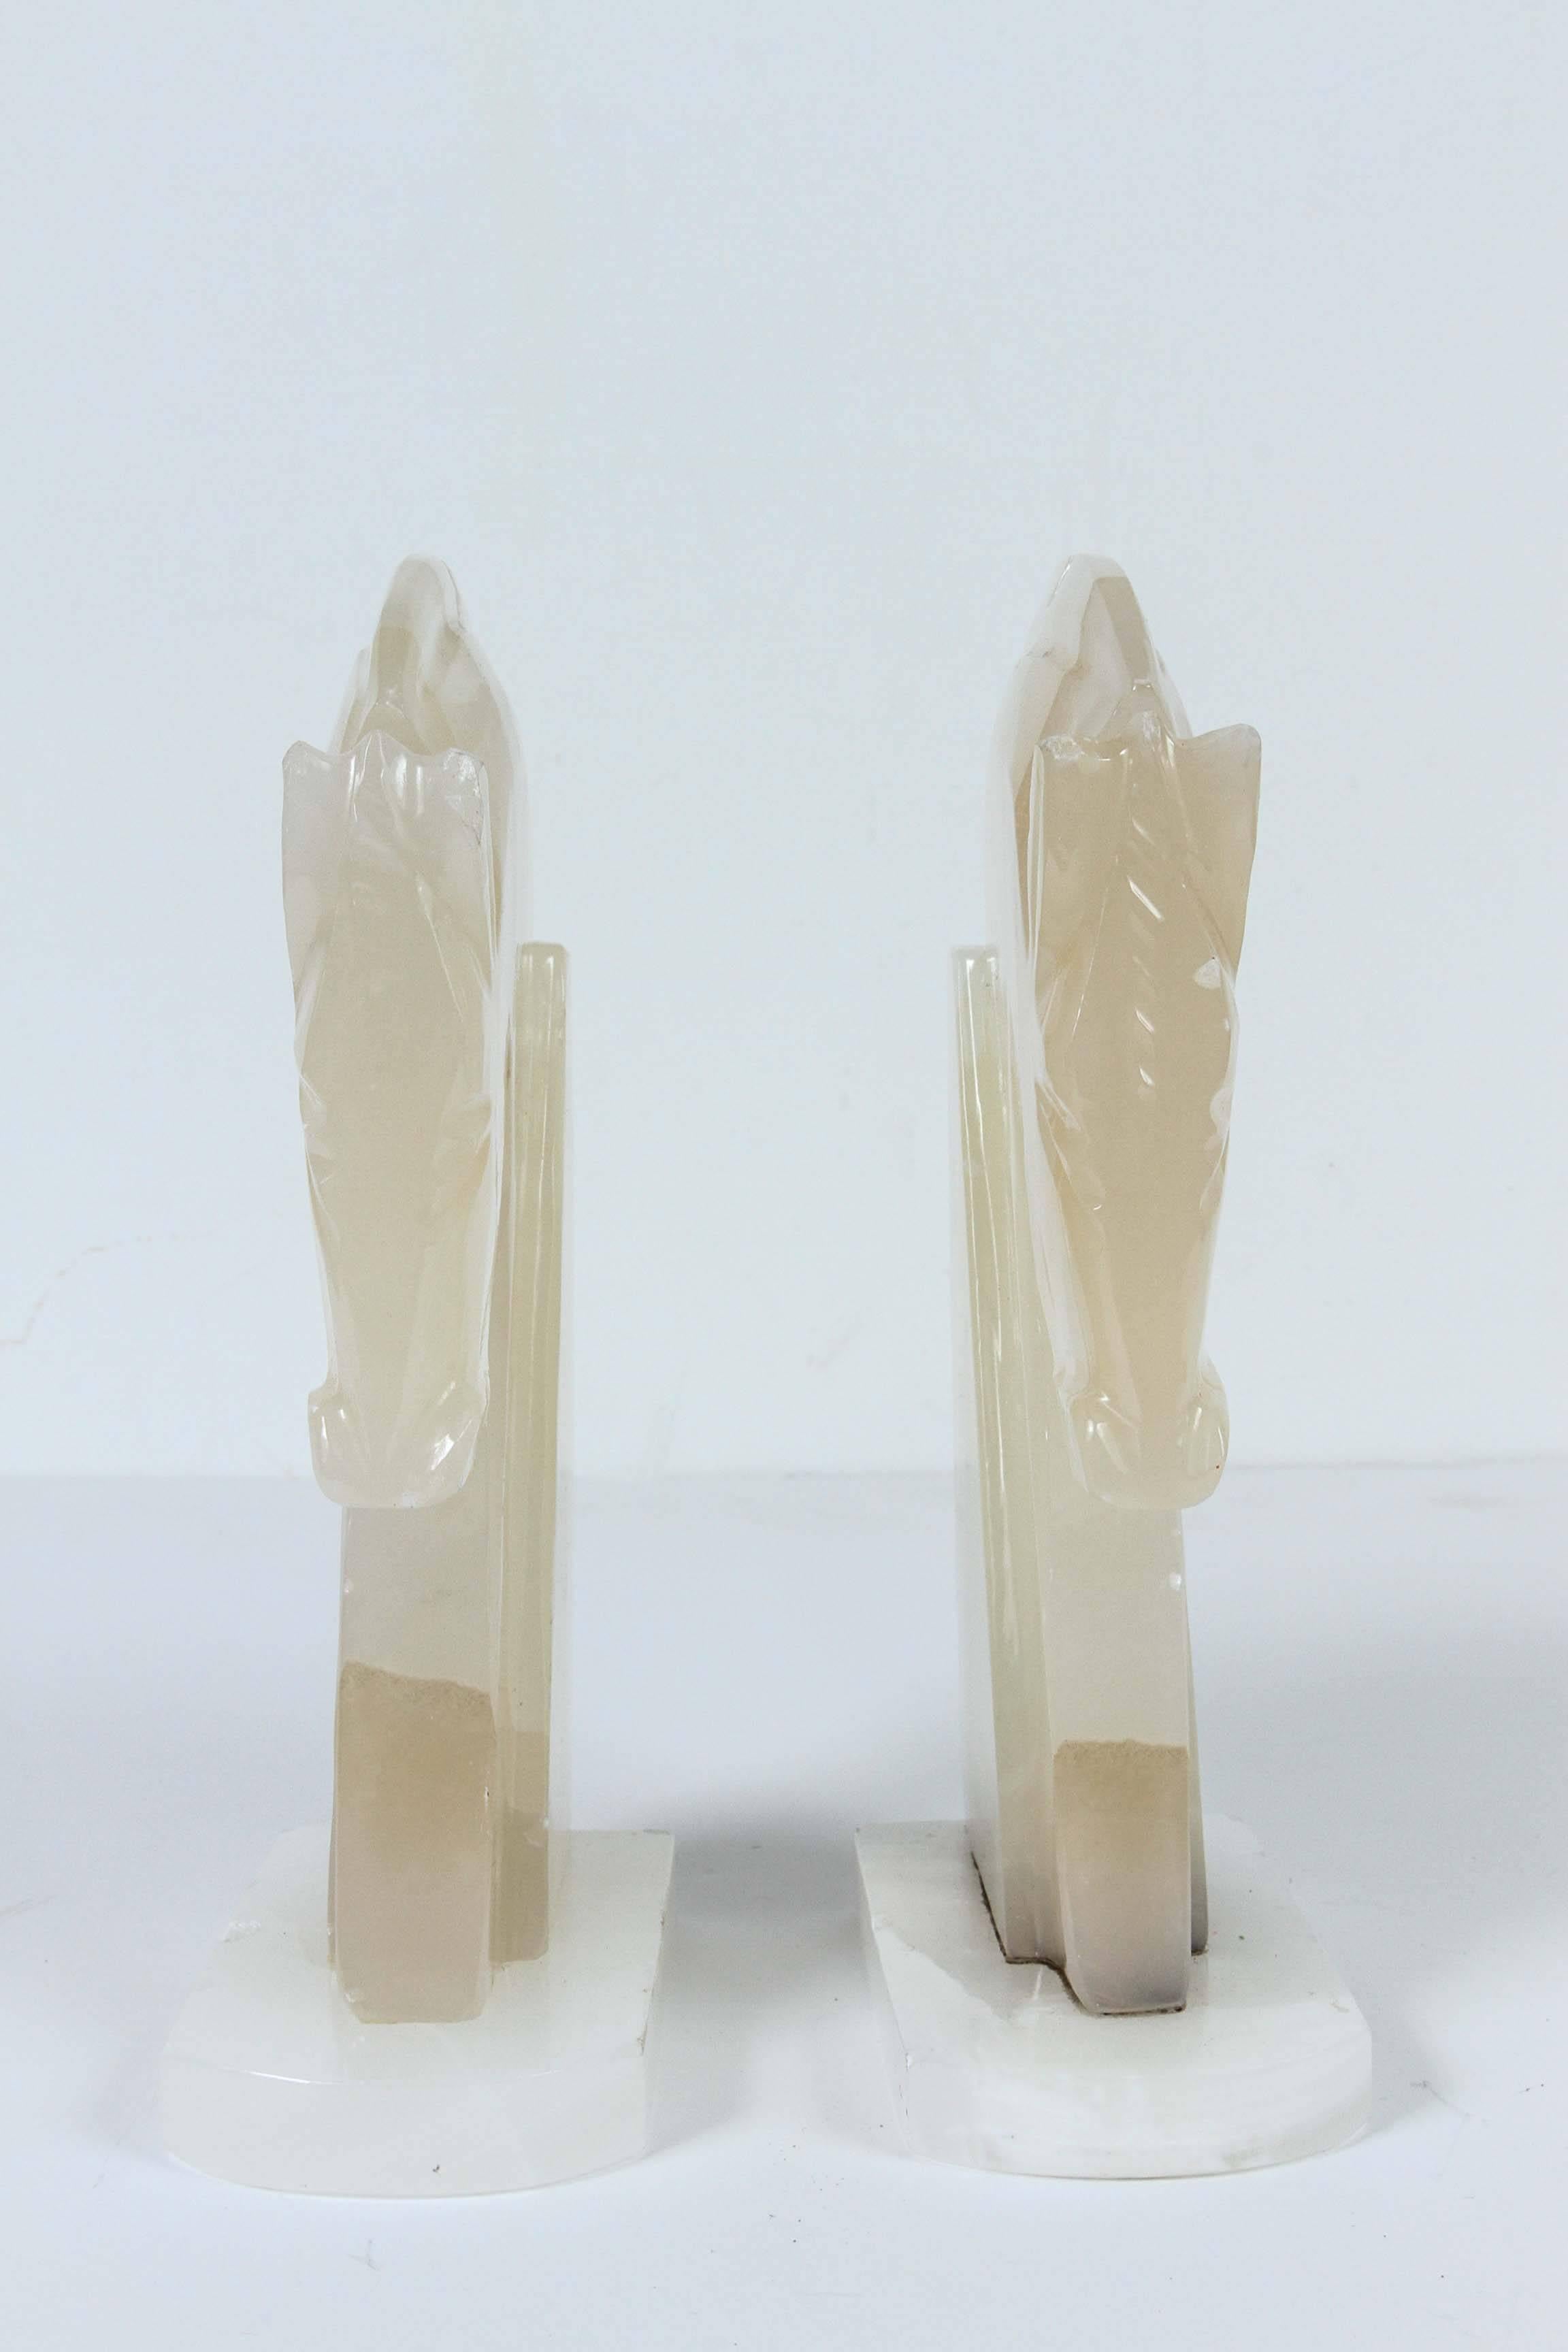 American Pair of Art Deco Style Horses Bookends